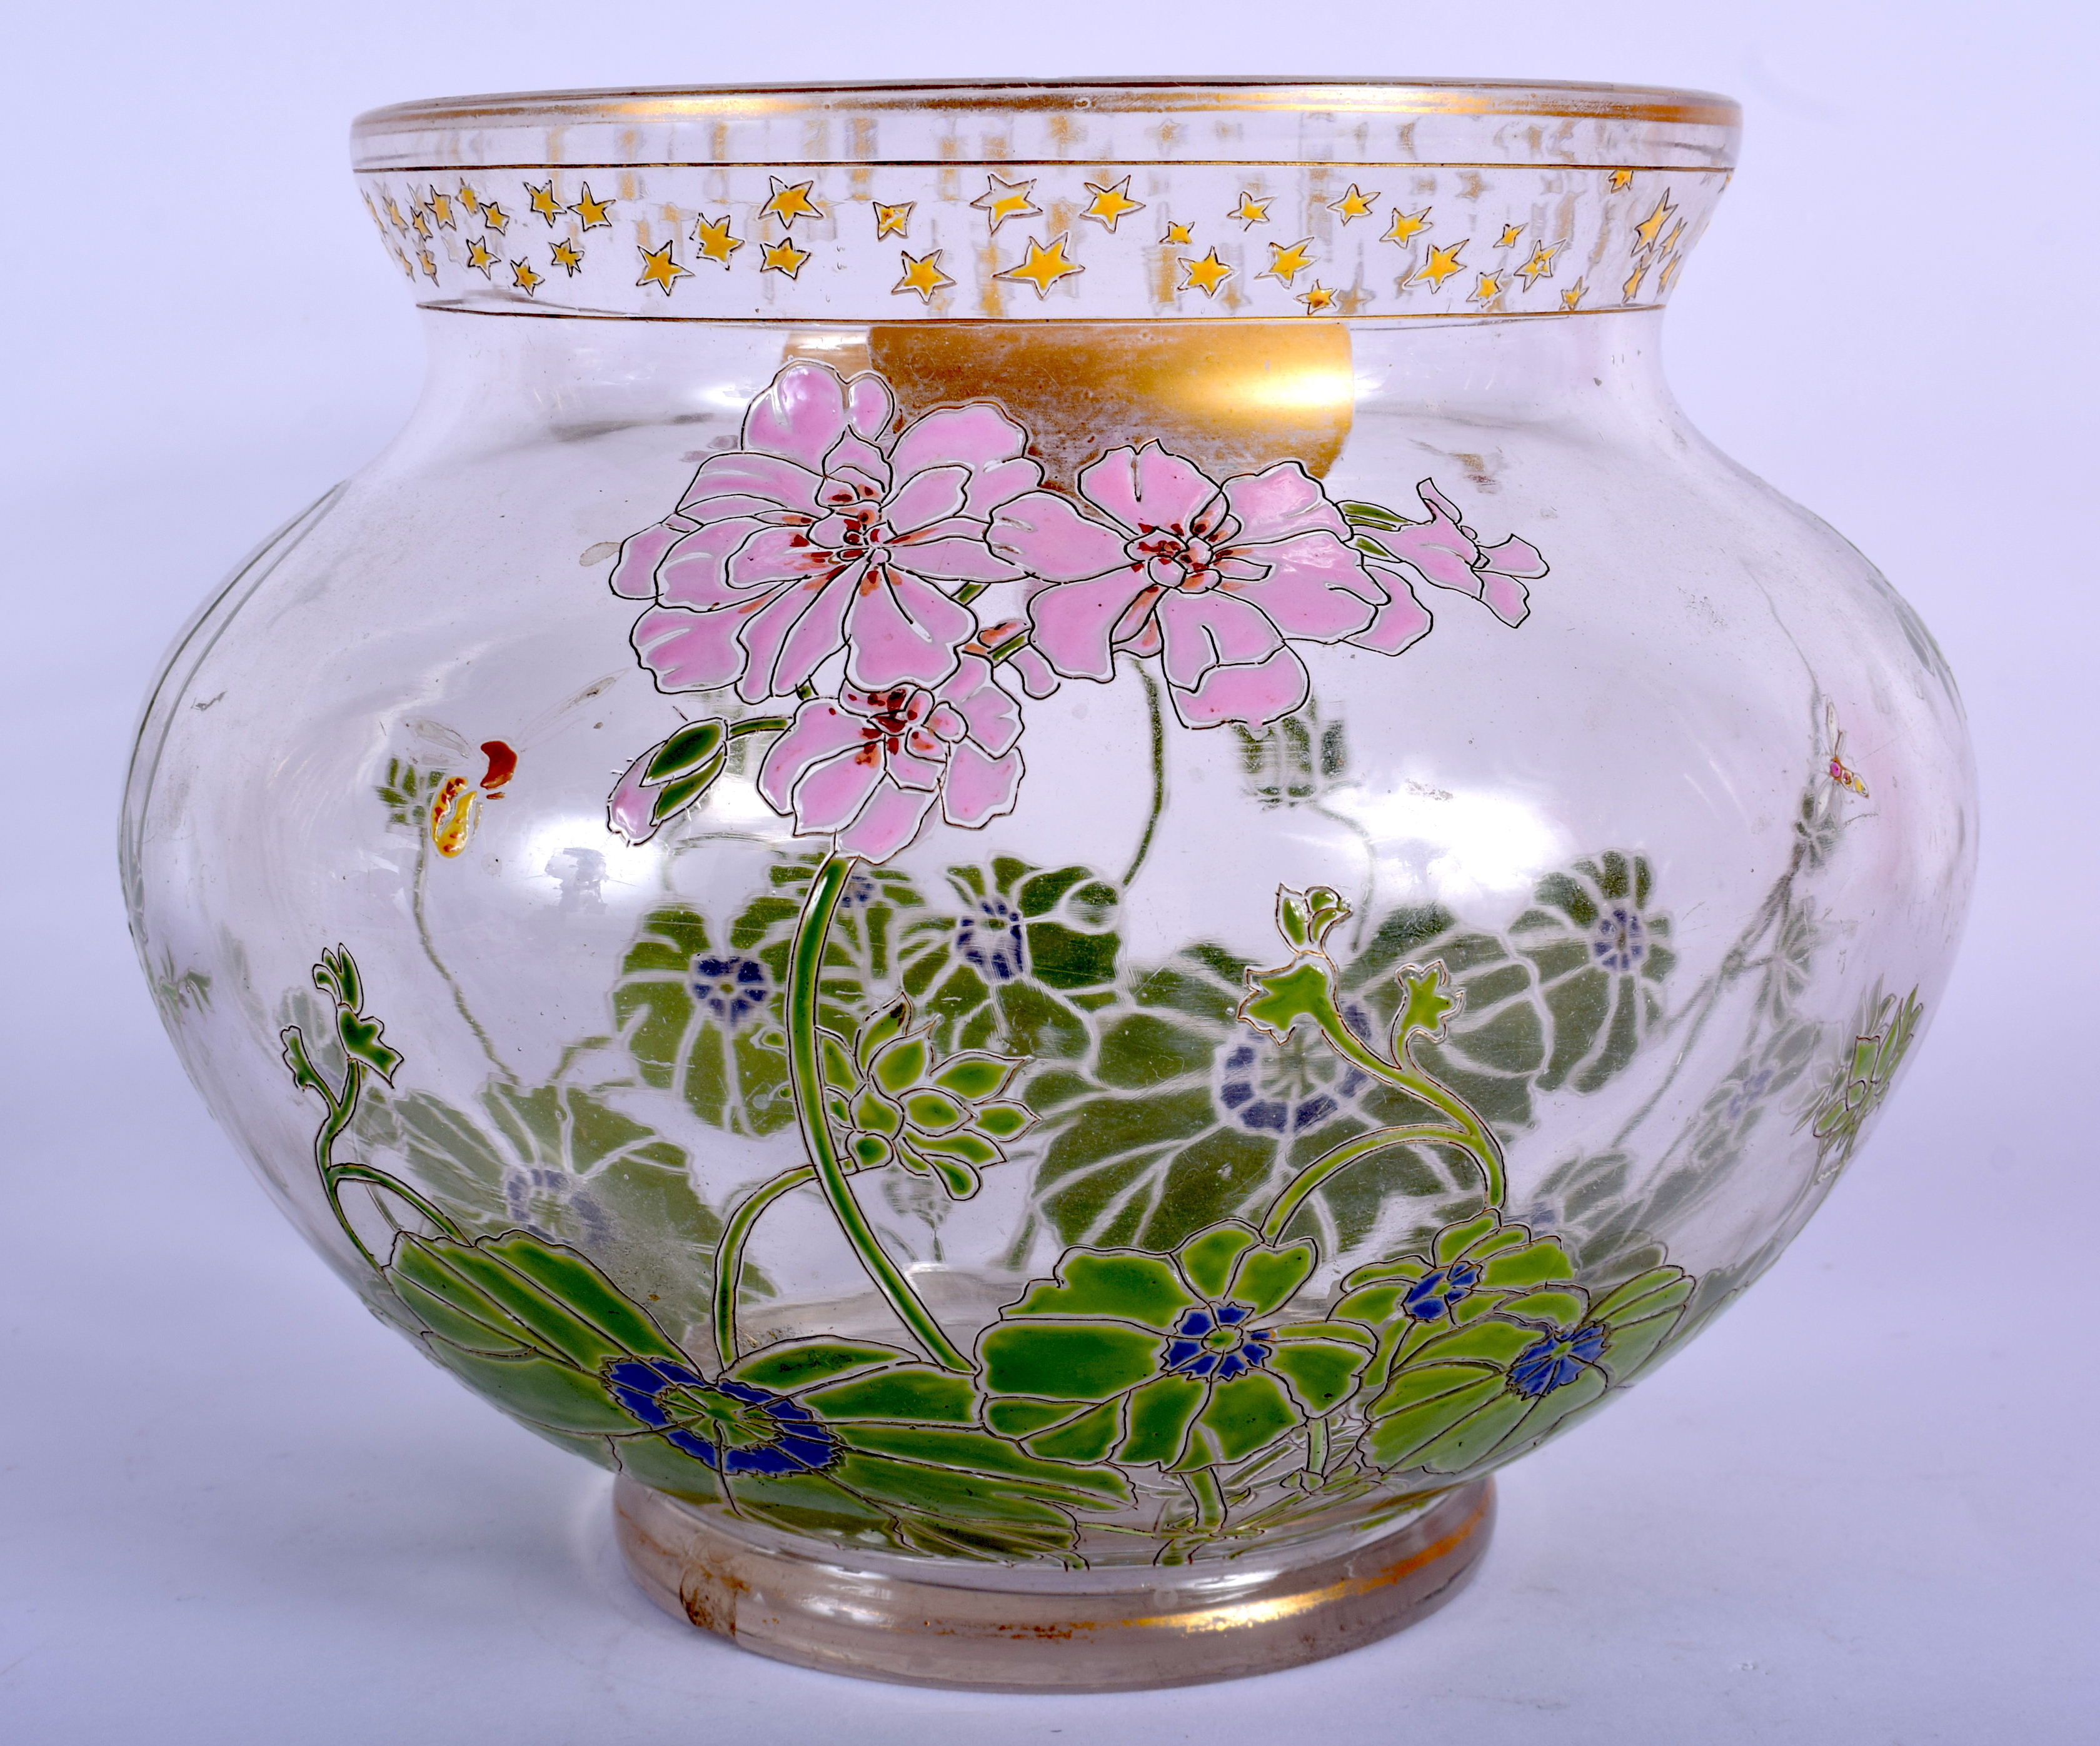 AN ART NOUVEAU ENAMELLED GLASS VASE painted with foliage and bees. 18 cm x 16 cm. - Image 2 of 3